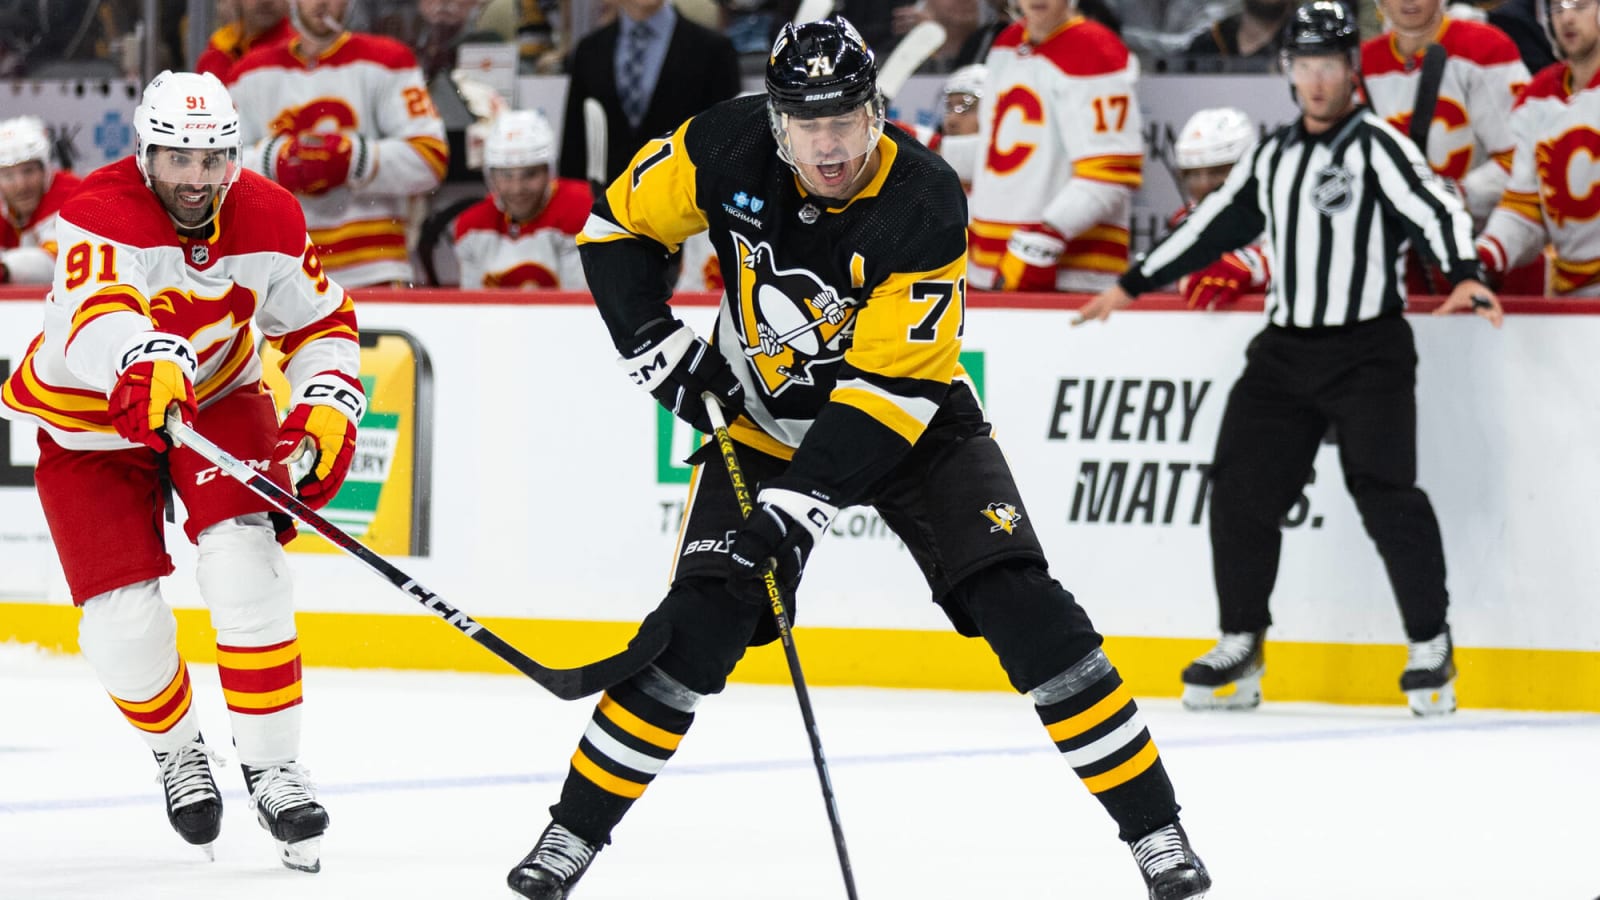 Third pairing's defensive struggles too much for Penguins to come